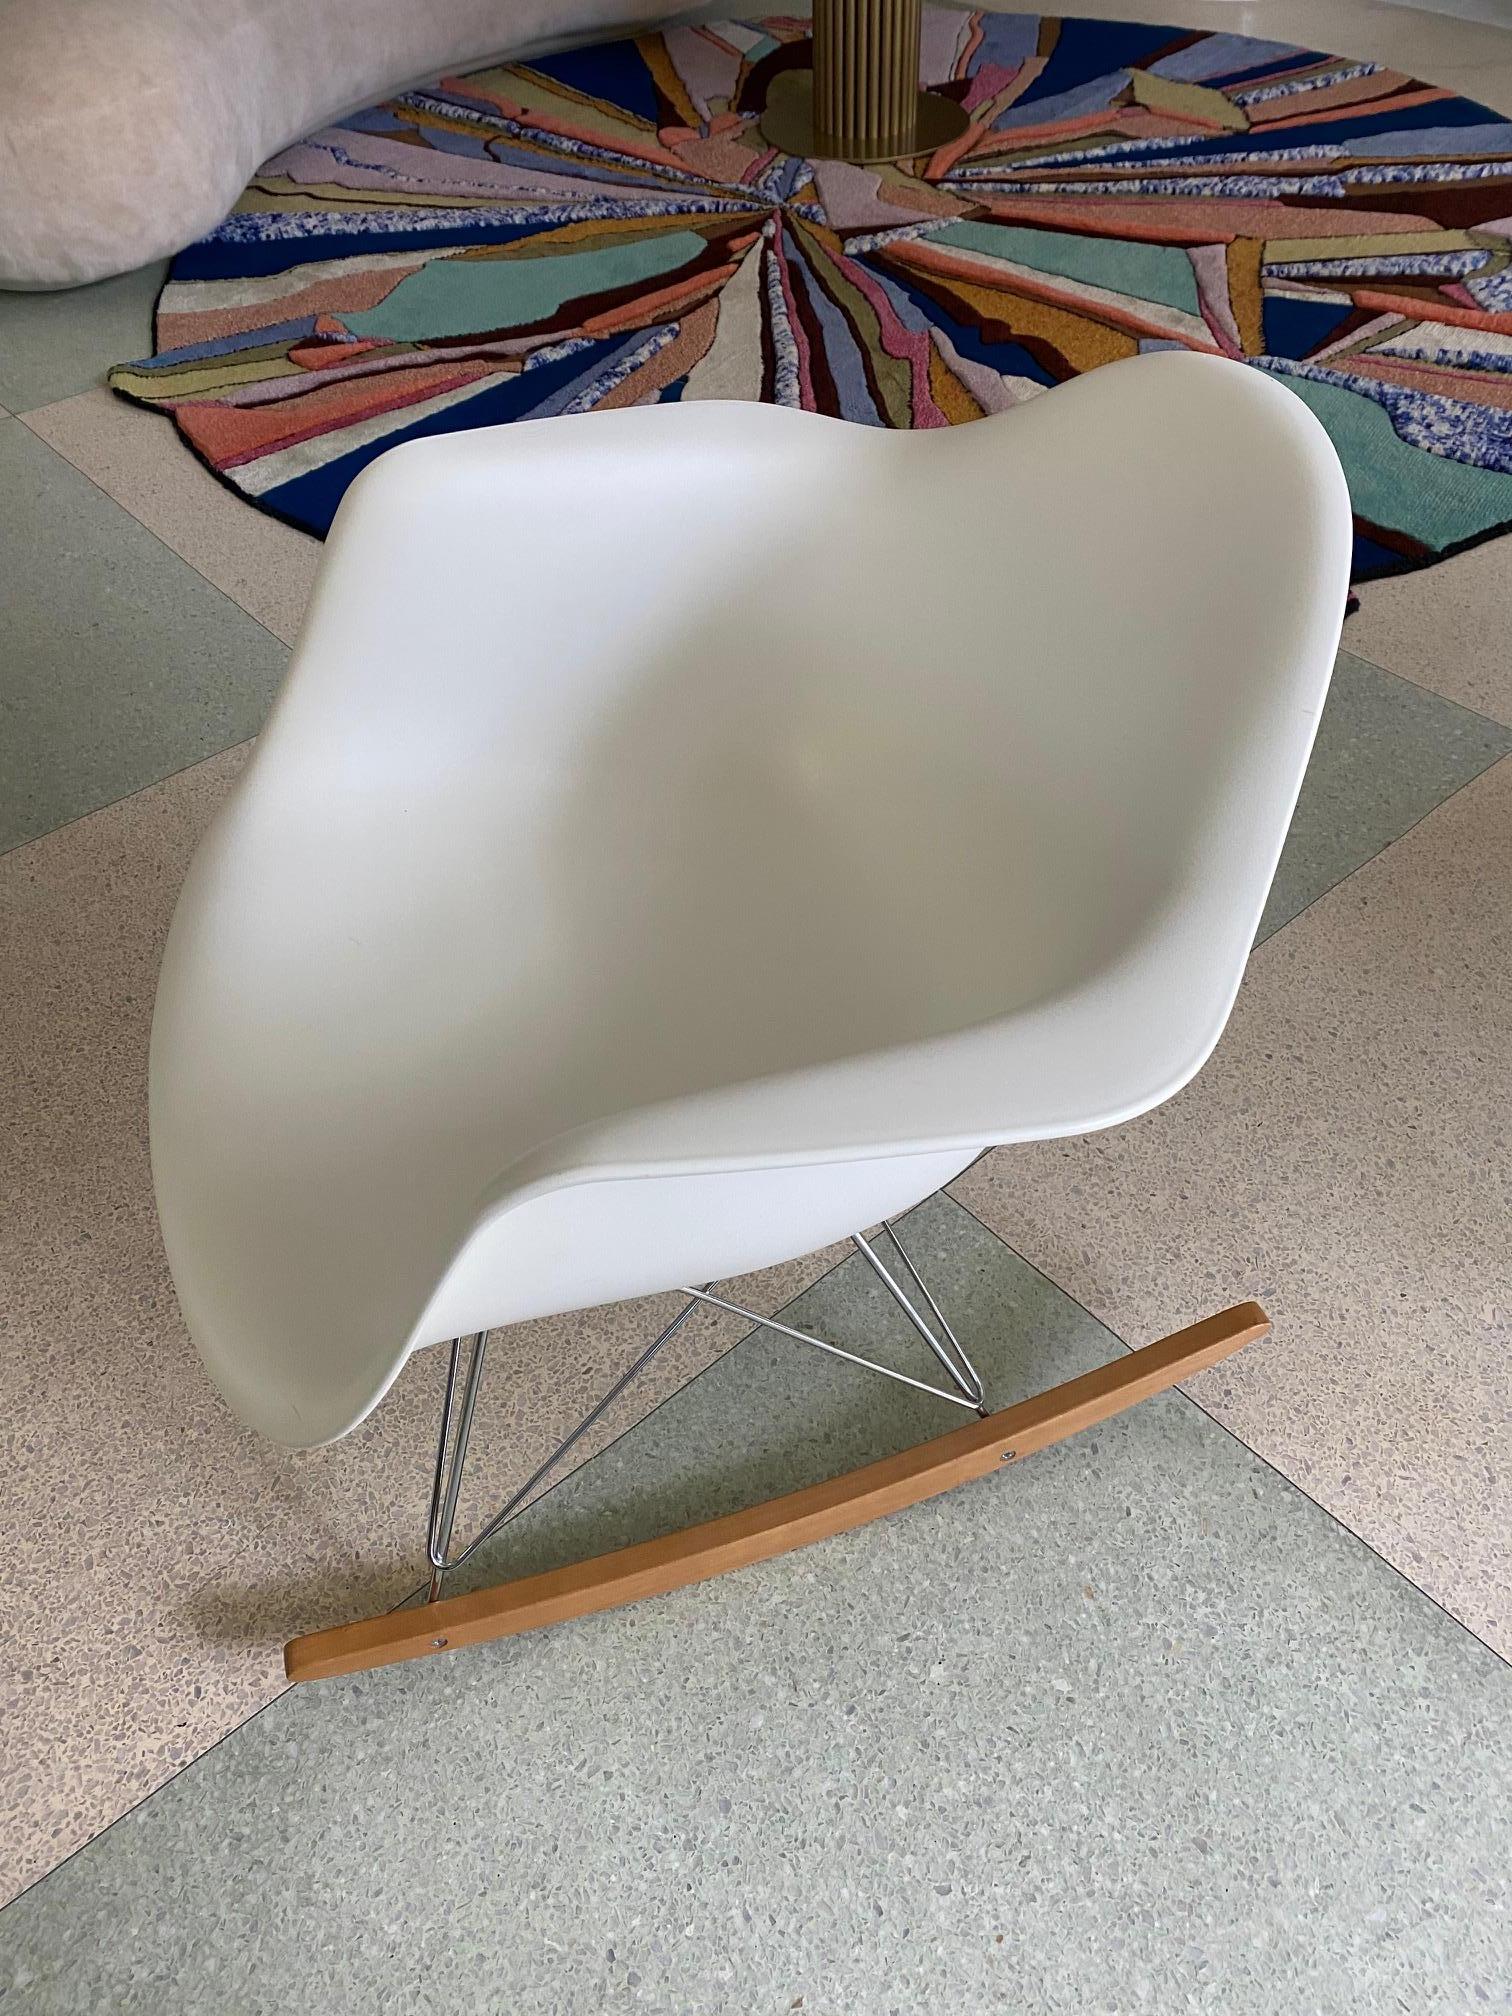 Contemporary Eames Molded Armchair, Rocker Base designed by Charles and Ray Eames